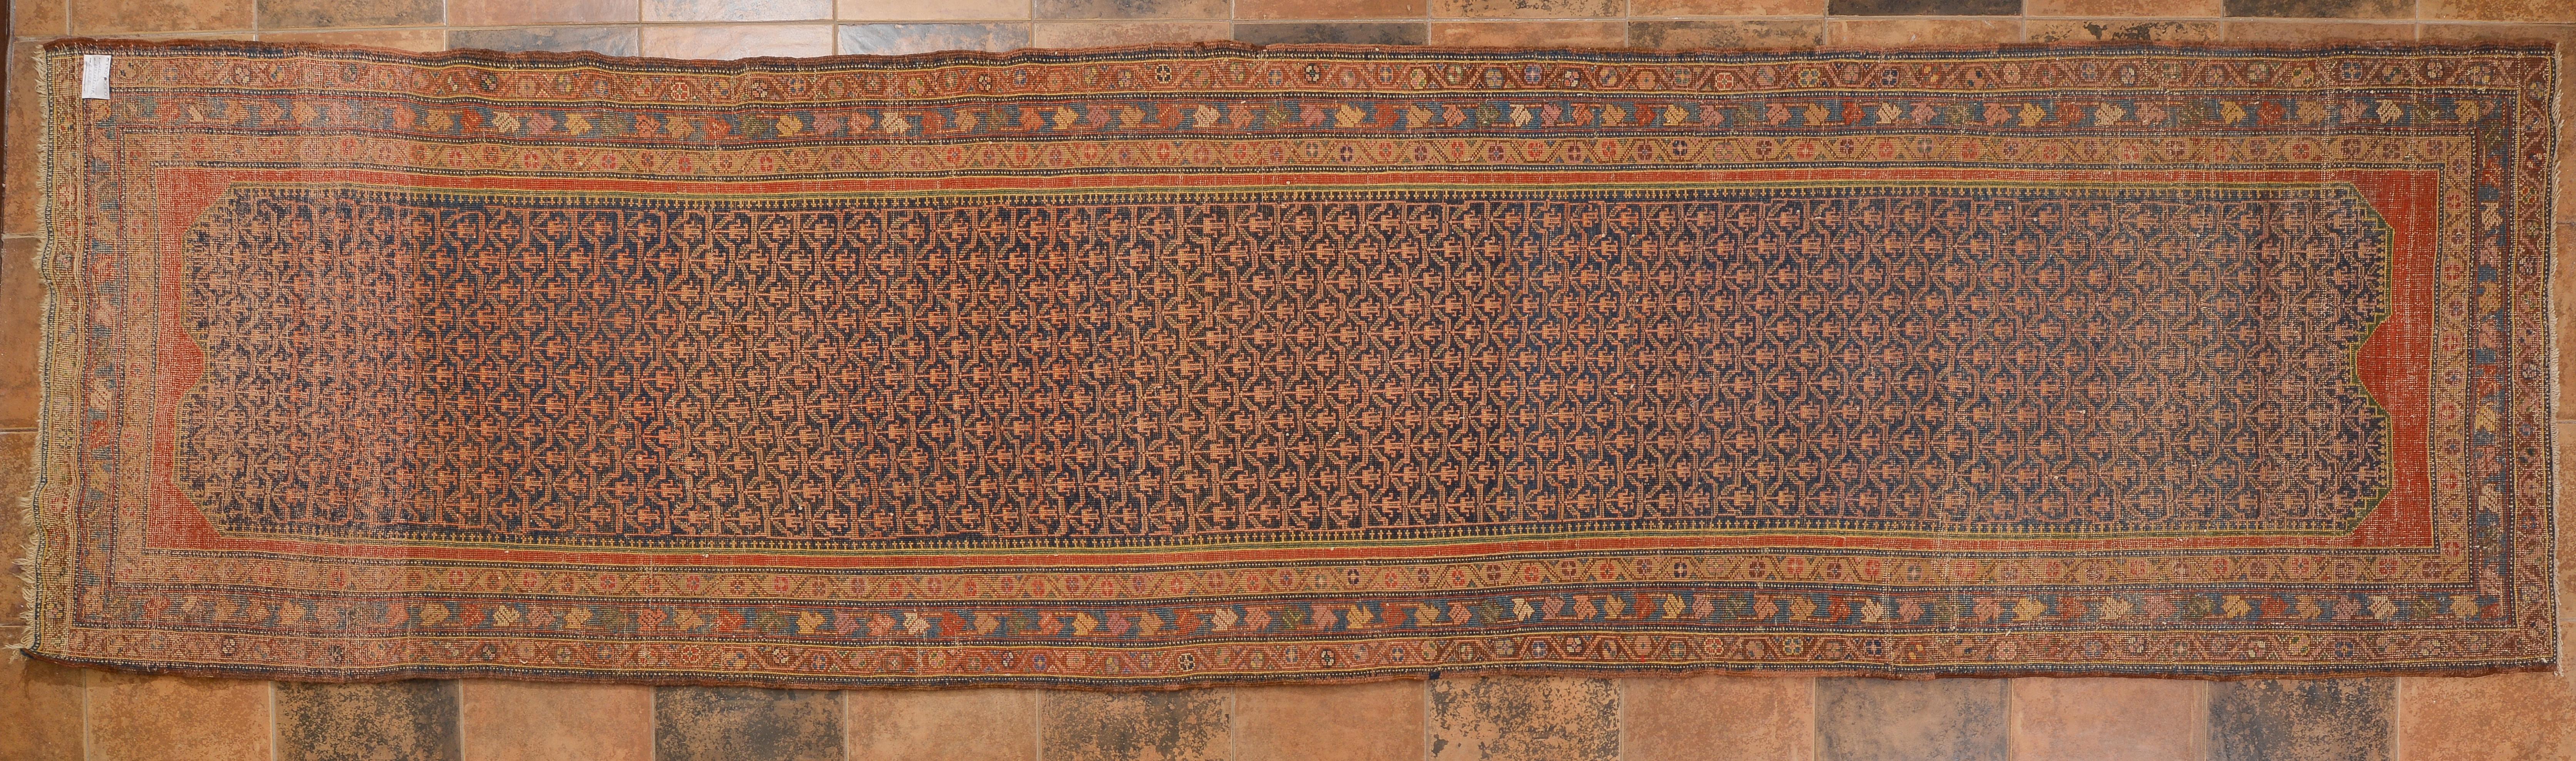 Caucasian Old Azeri Long Runner or Gallery Rug For Sale